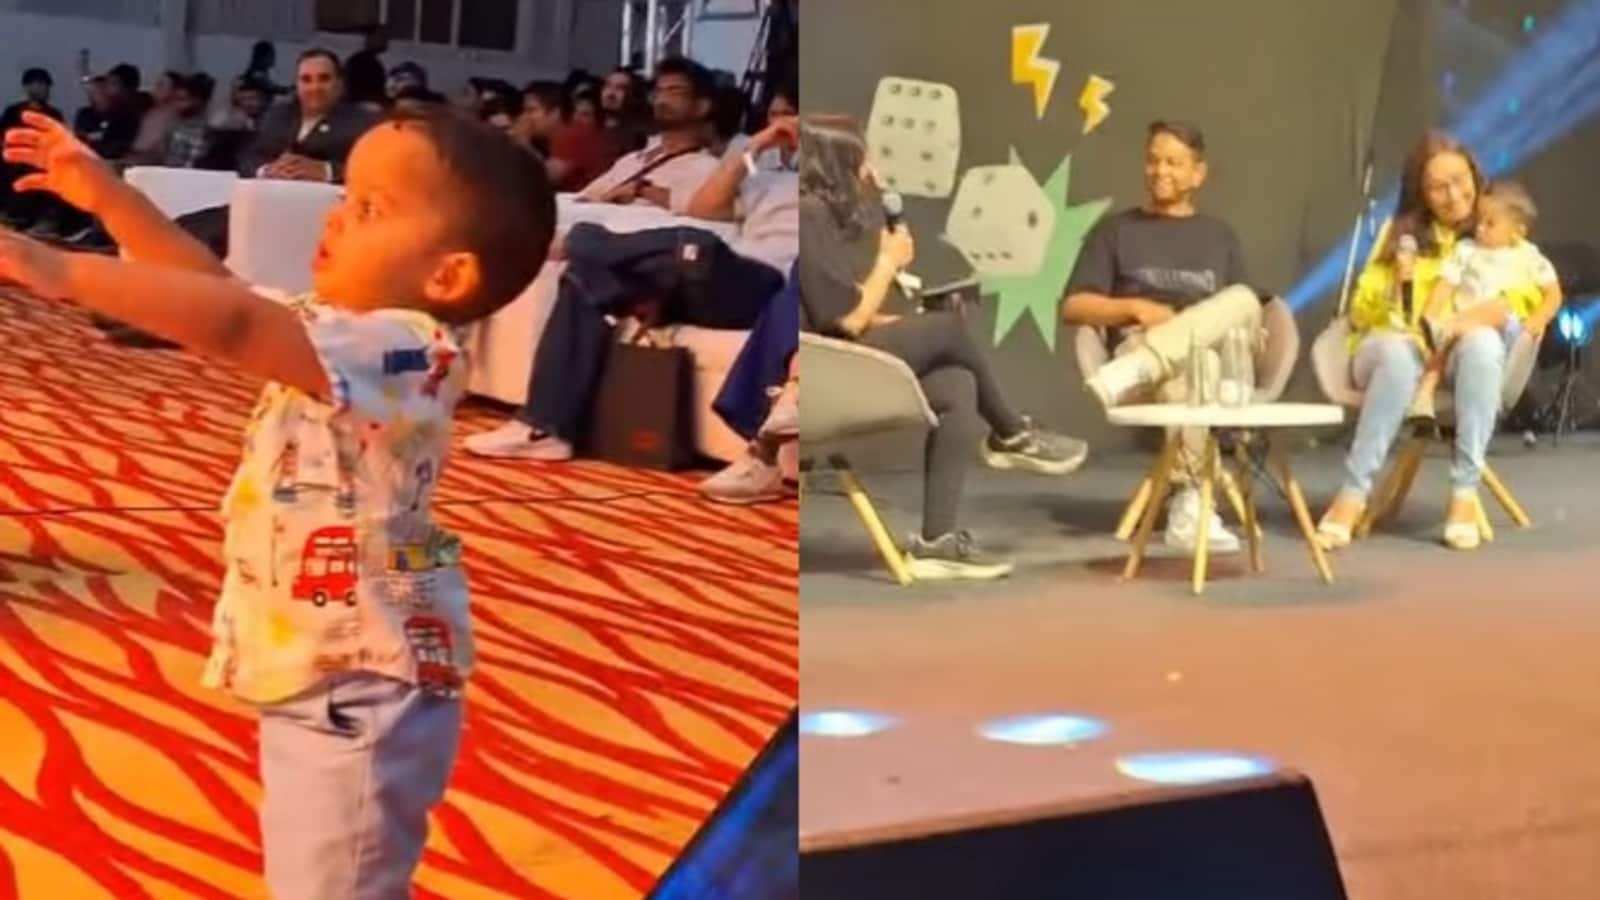 Edelweiss MF MD Radhika Gupta's 2-year-old son steals spotlight from her on stage at Zerodha event